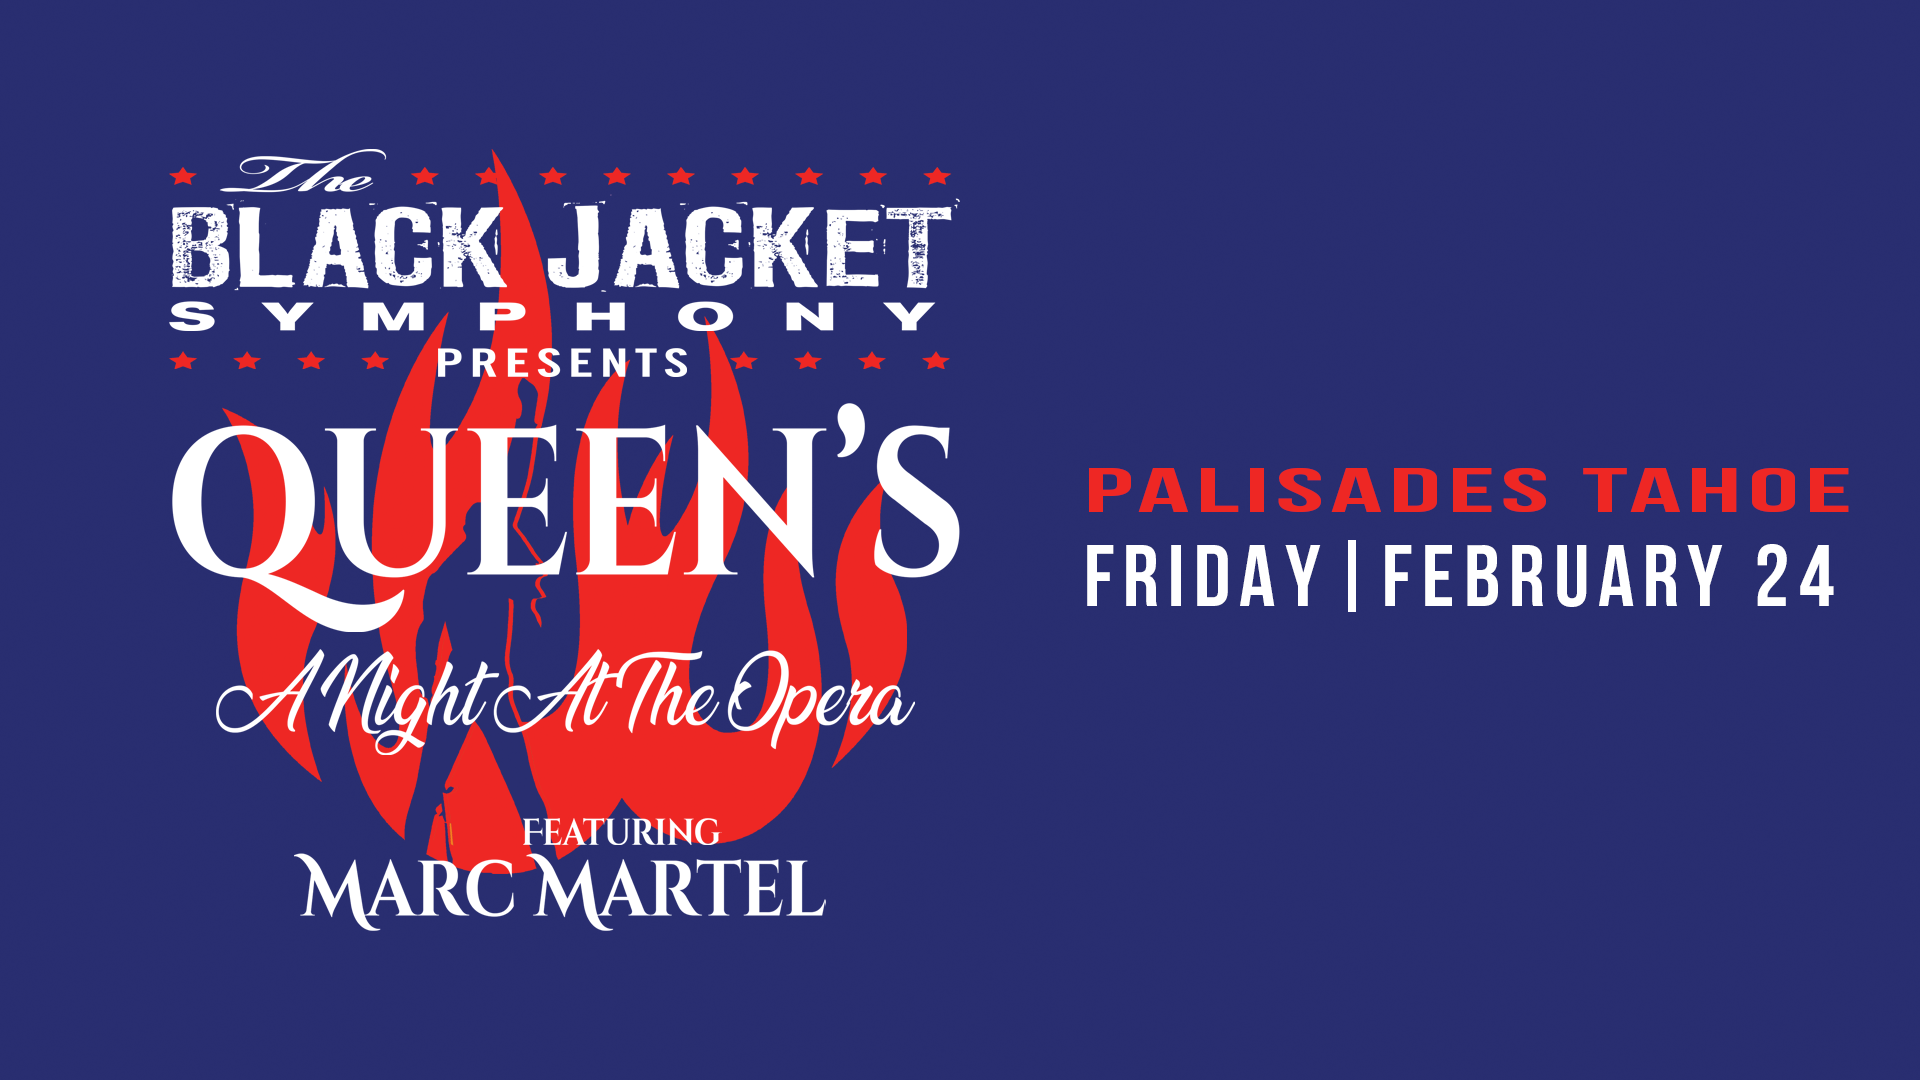 RESCHEDULED: Free Concert with Black Jacket Symphony feat Marc Martel